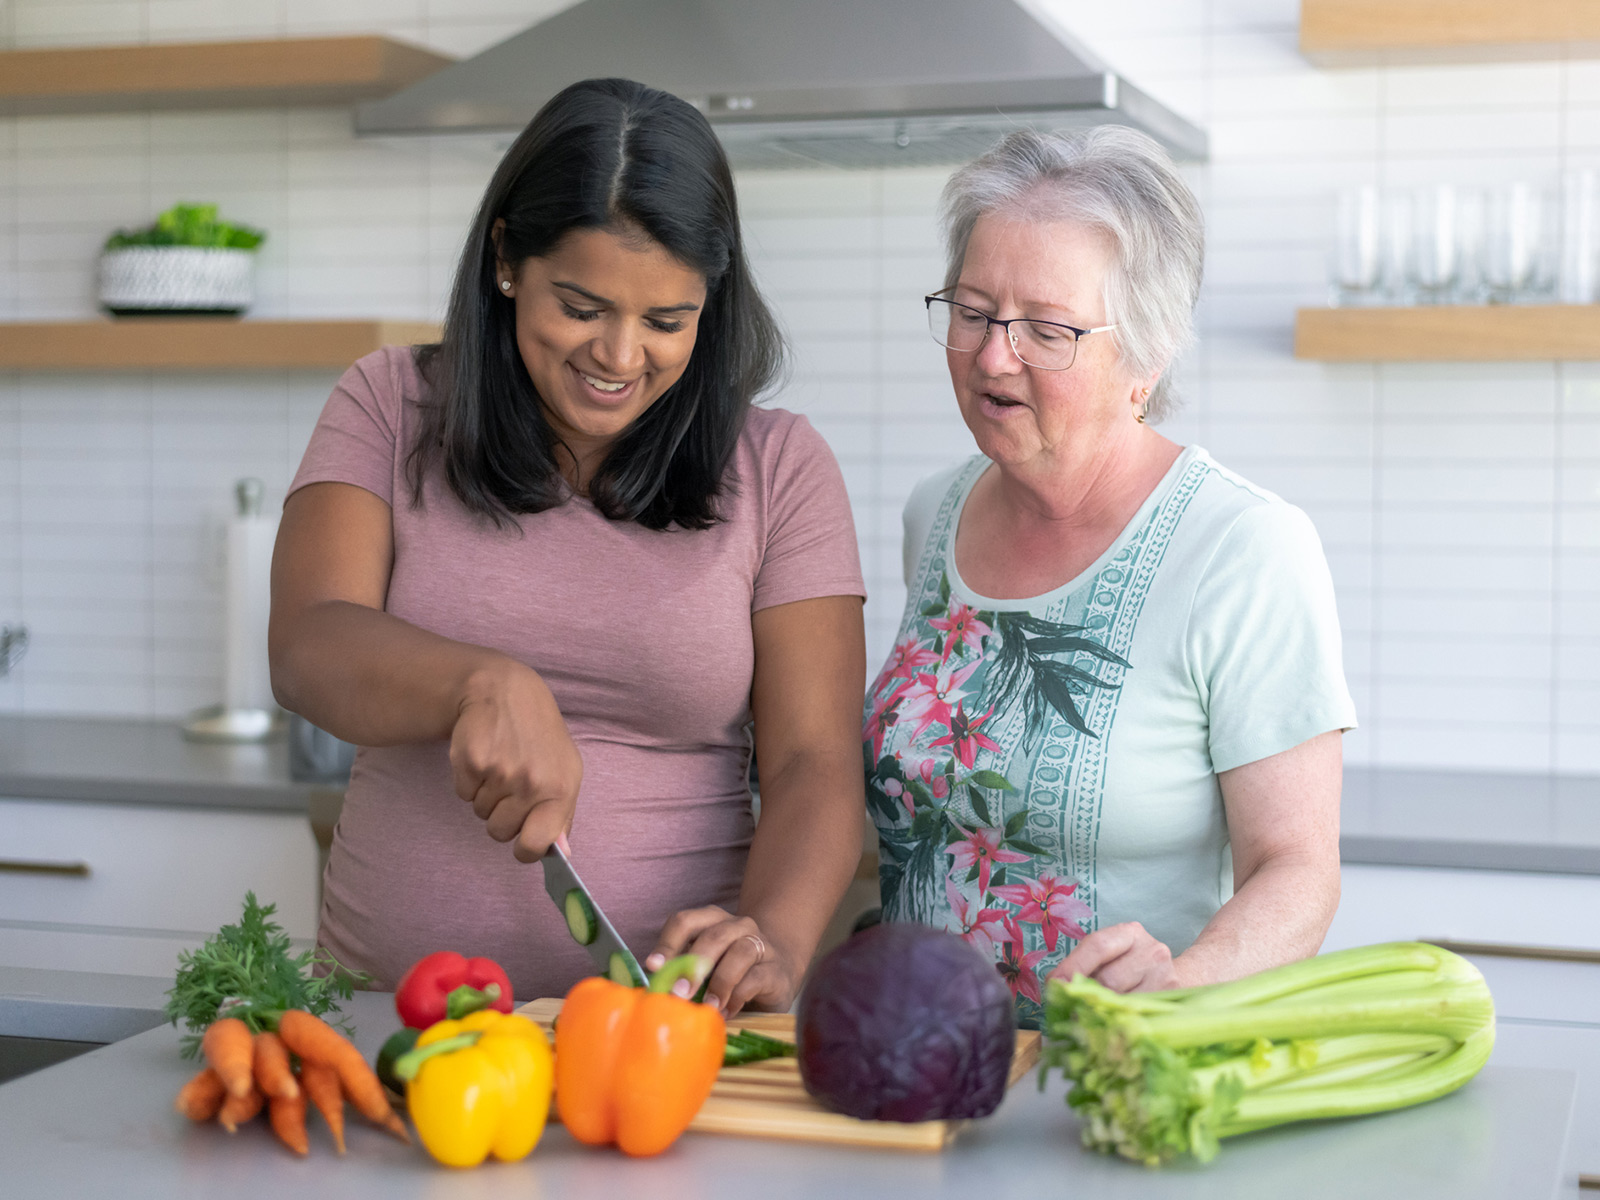 Pregnant woman chops vegetables on kitchen counter as older woman looks on